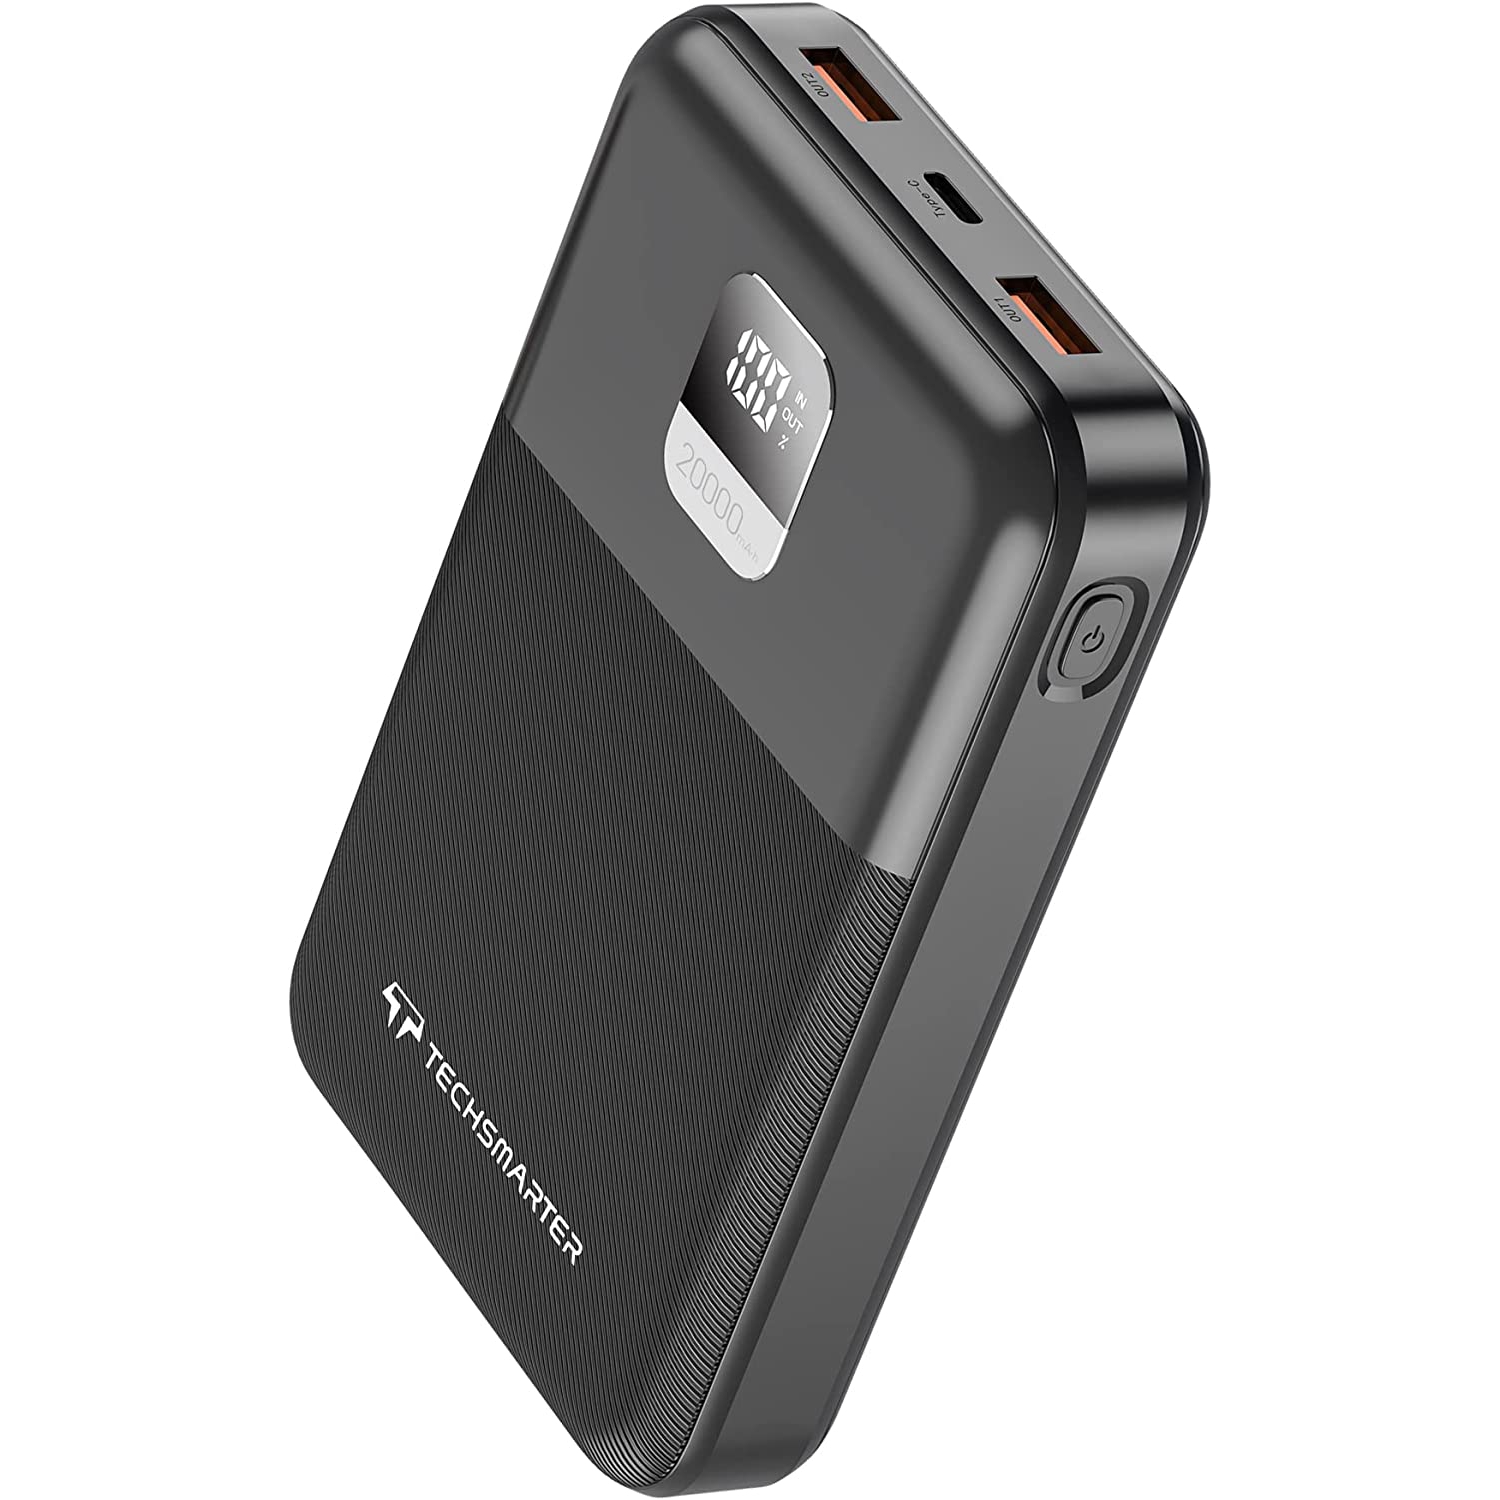 Techsmarter 20000mah 65W PPS USB-C PD Power Bank with Samsung Super Fast Charging. Laptop Portable Charger Compatible with iPhone, Galaxy, Android, iPad, MacBook, Chromebook, XPS